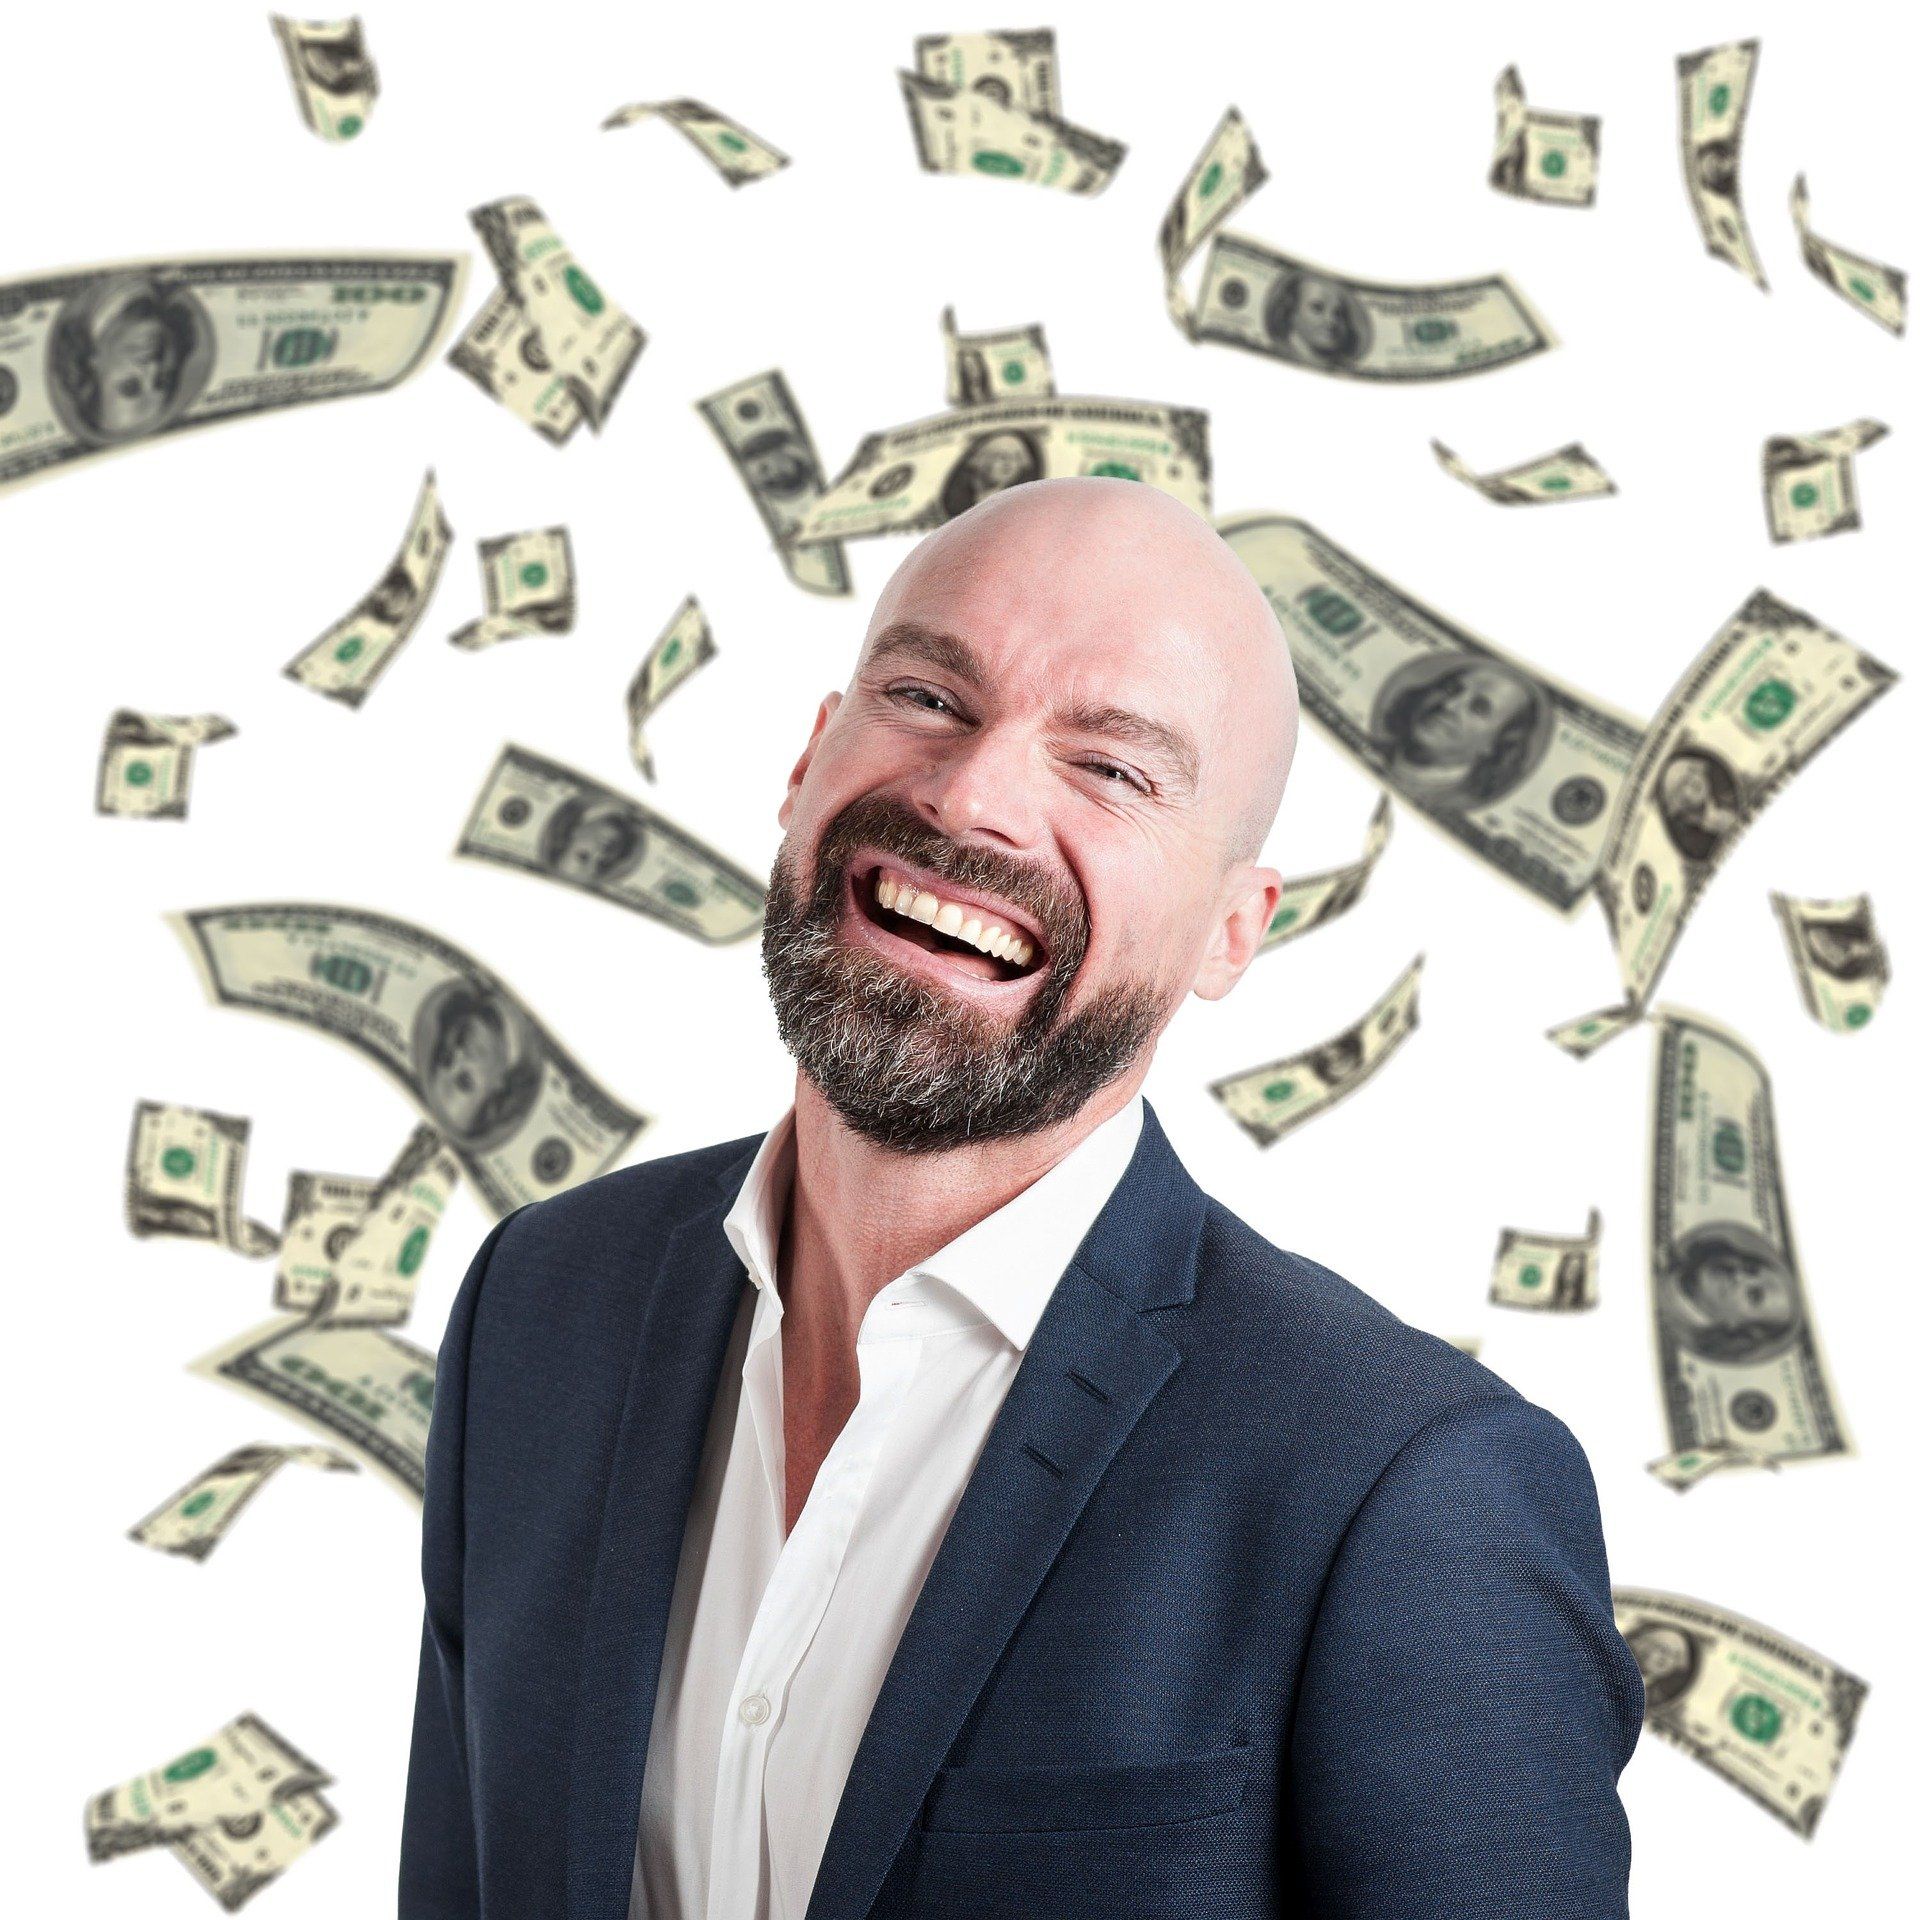 Business man with a large smile is standing around falling money